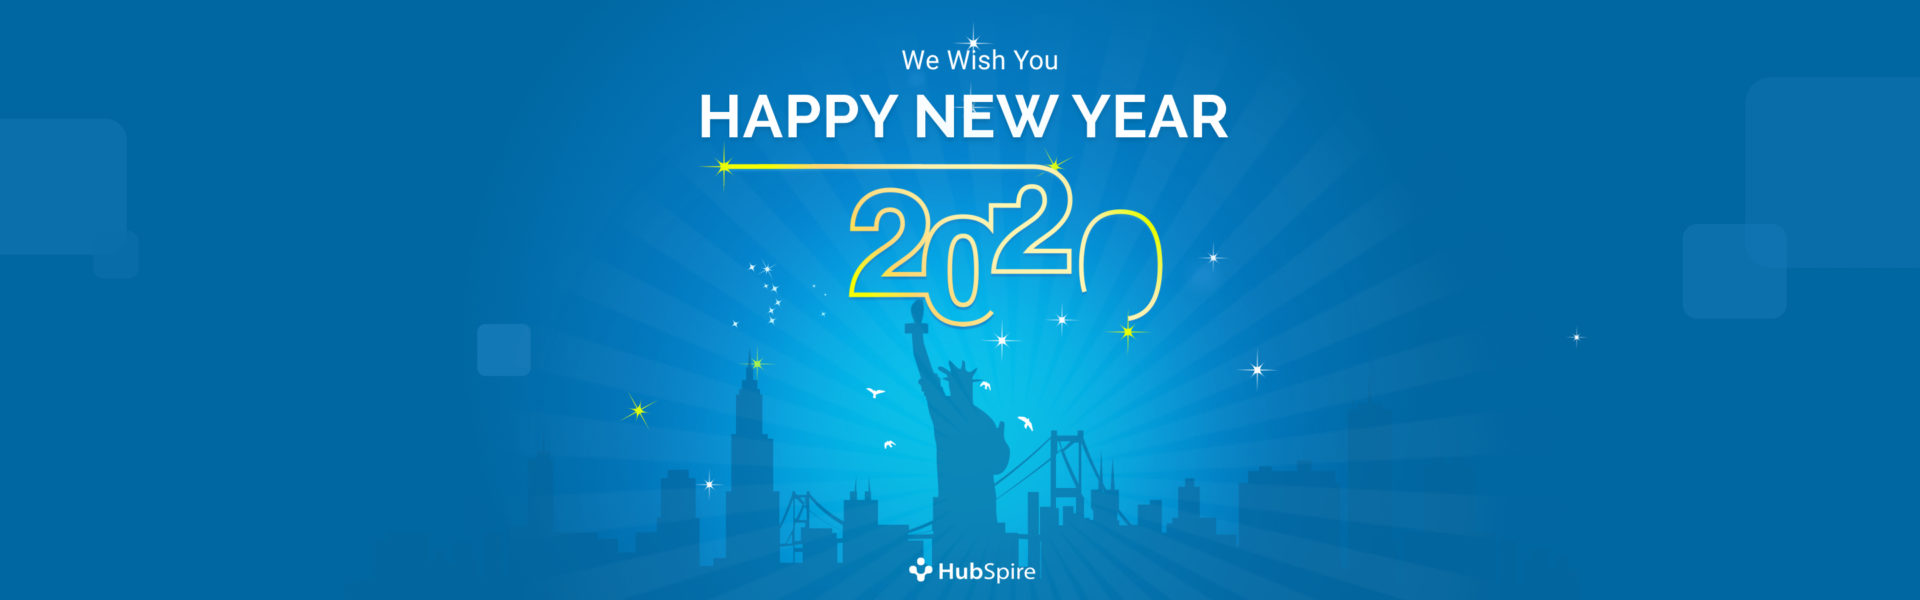 Here’s to 2020: a new decade of possibilities!